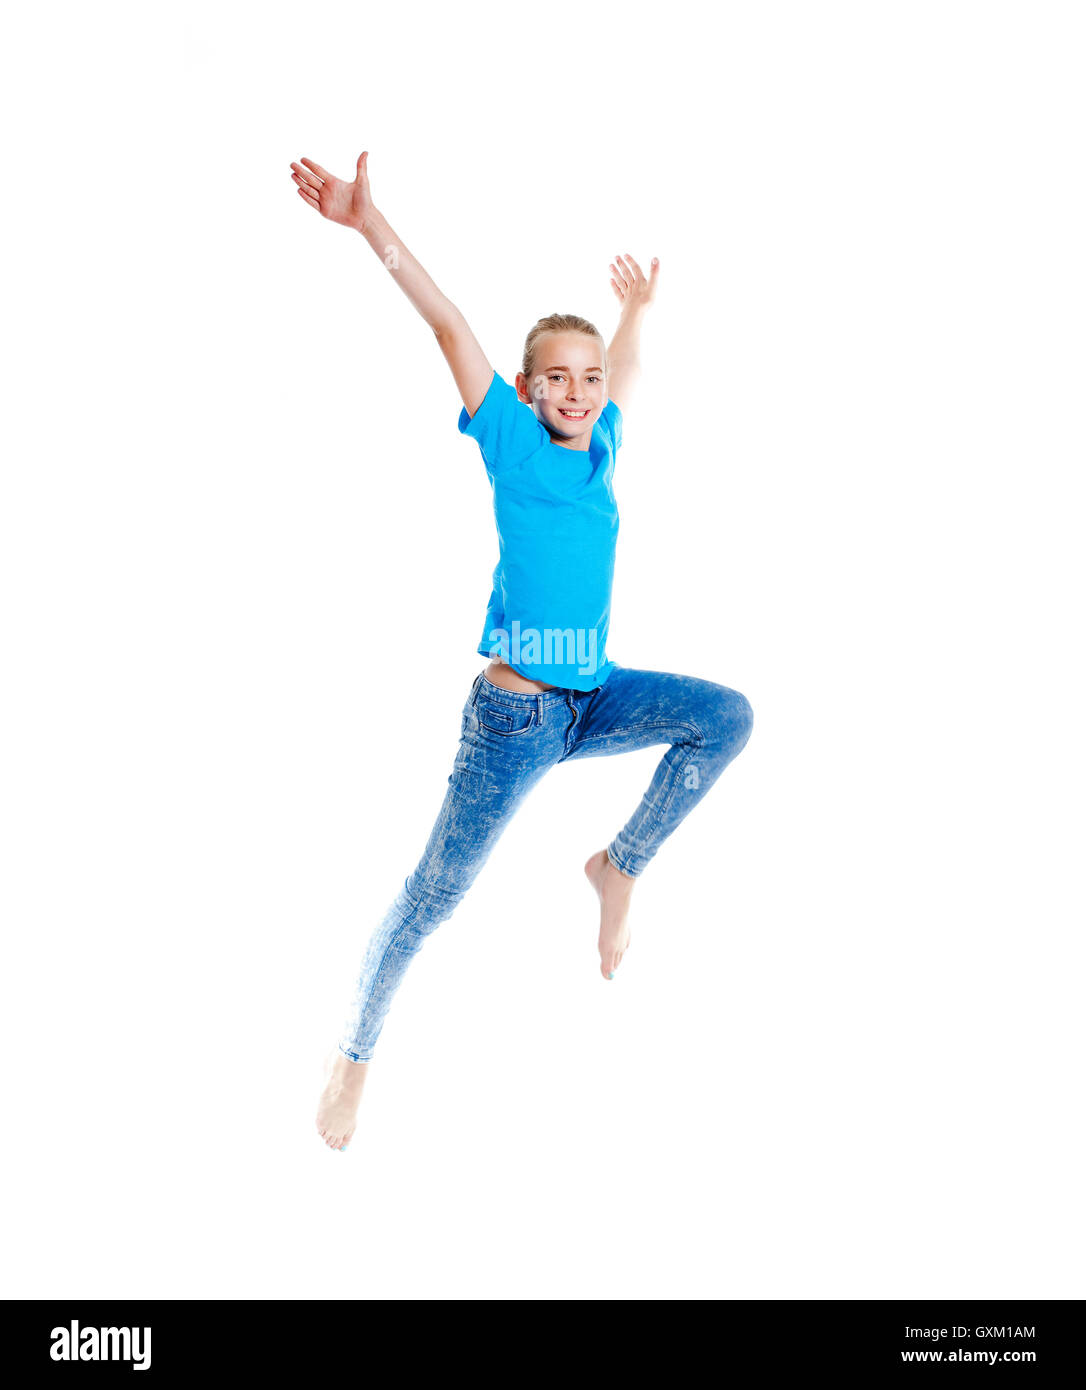 Young Girl with Blond Hair Jumping in the Air Stock Photo